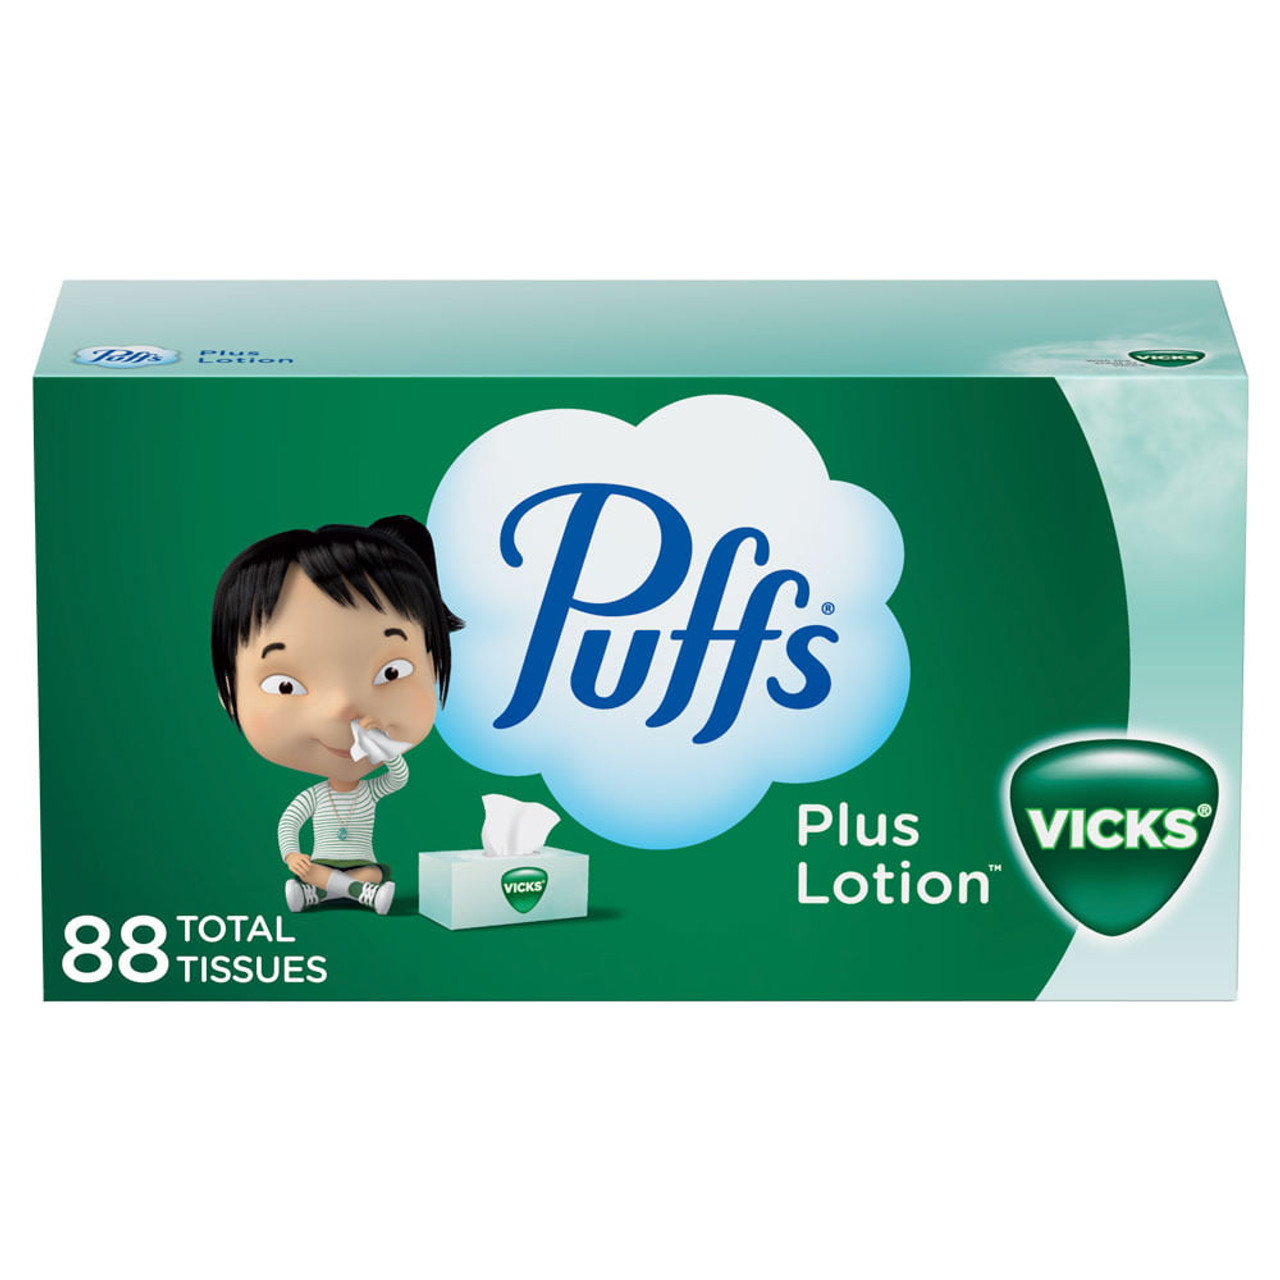 Puffs Plus Lotion Facial Tissues With The Scent Of Vicks, 88 Ea, 24